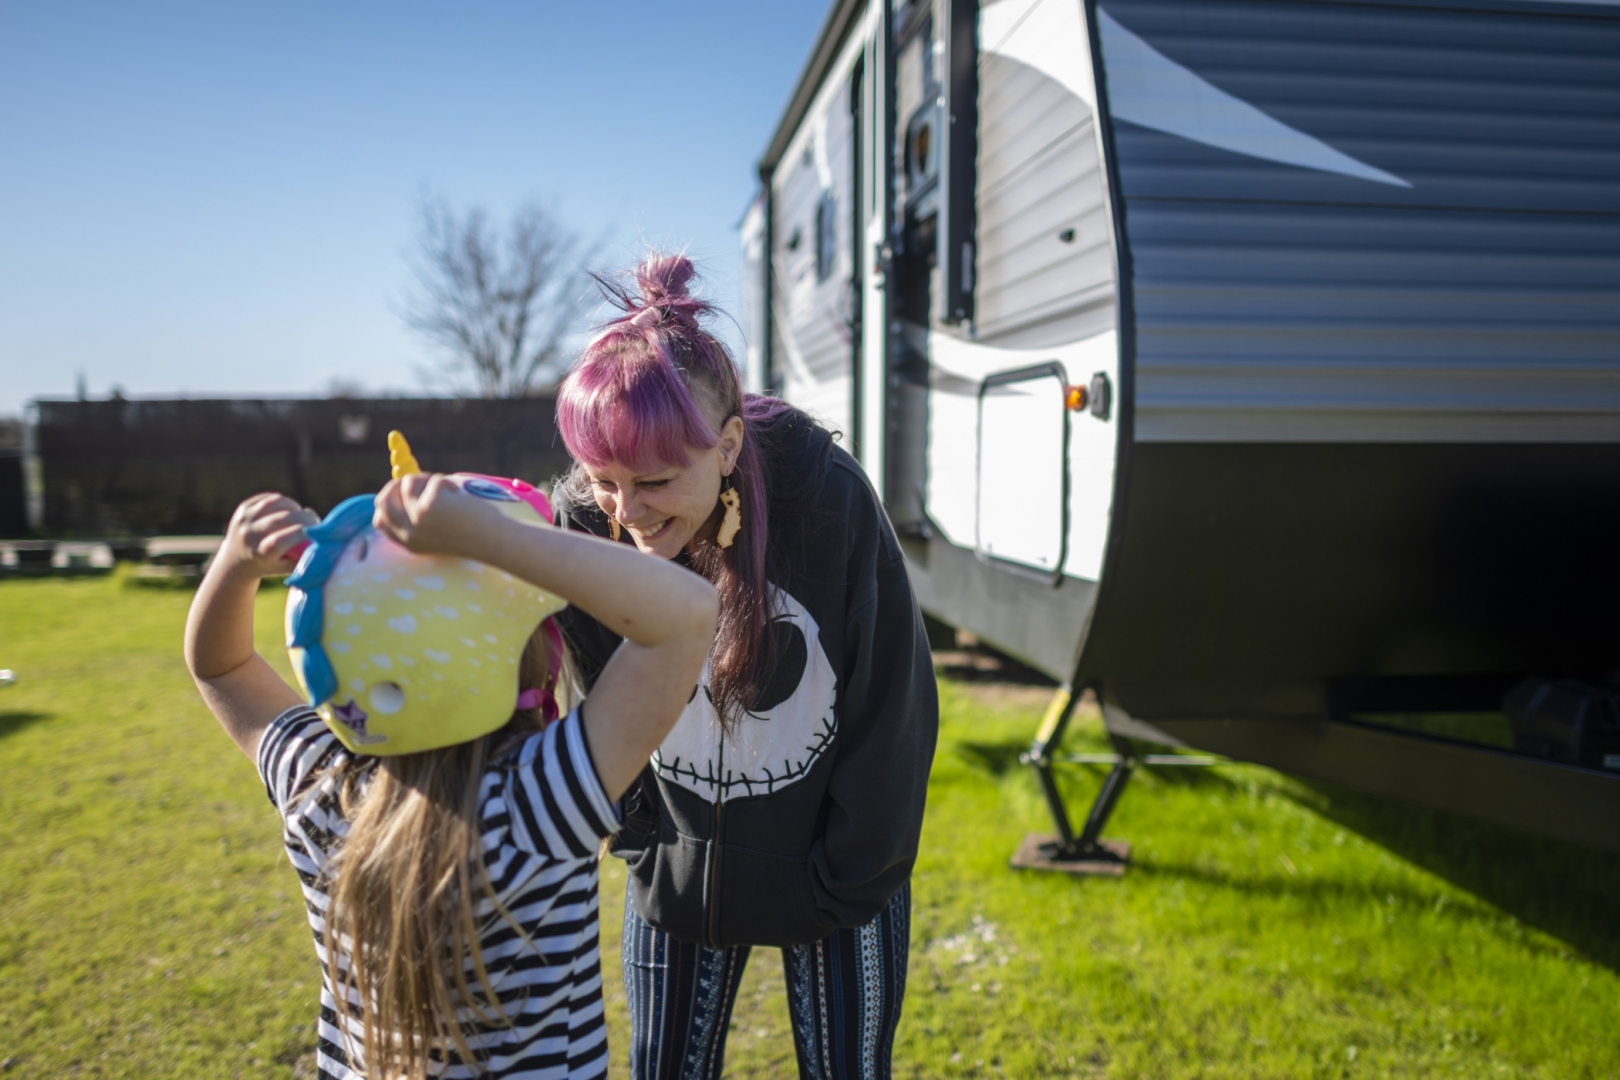 Sabrina Hanes stands outside her trailer and leans over to smile at her daughter as she adjusts her unicorn bike helmet.